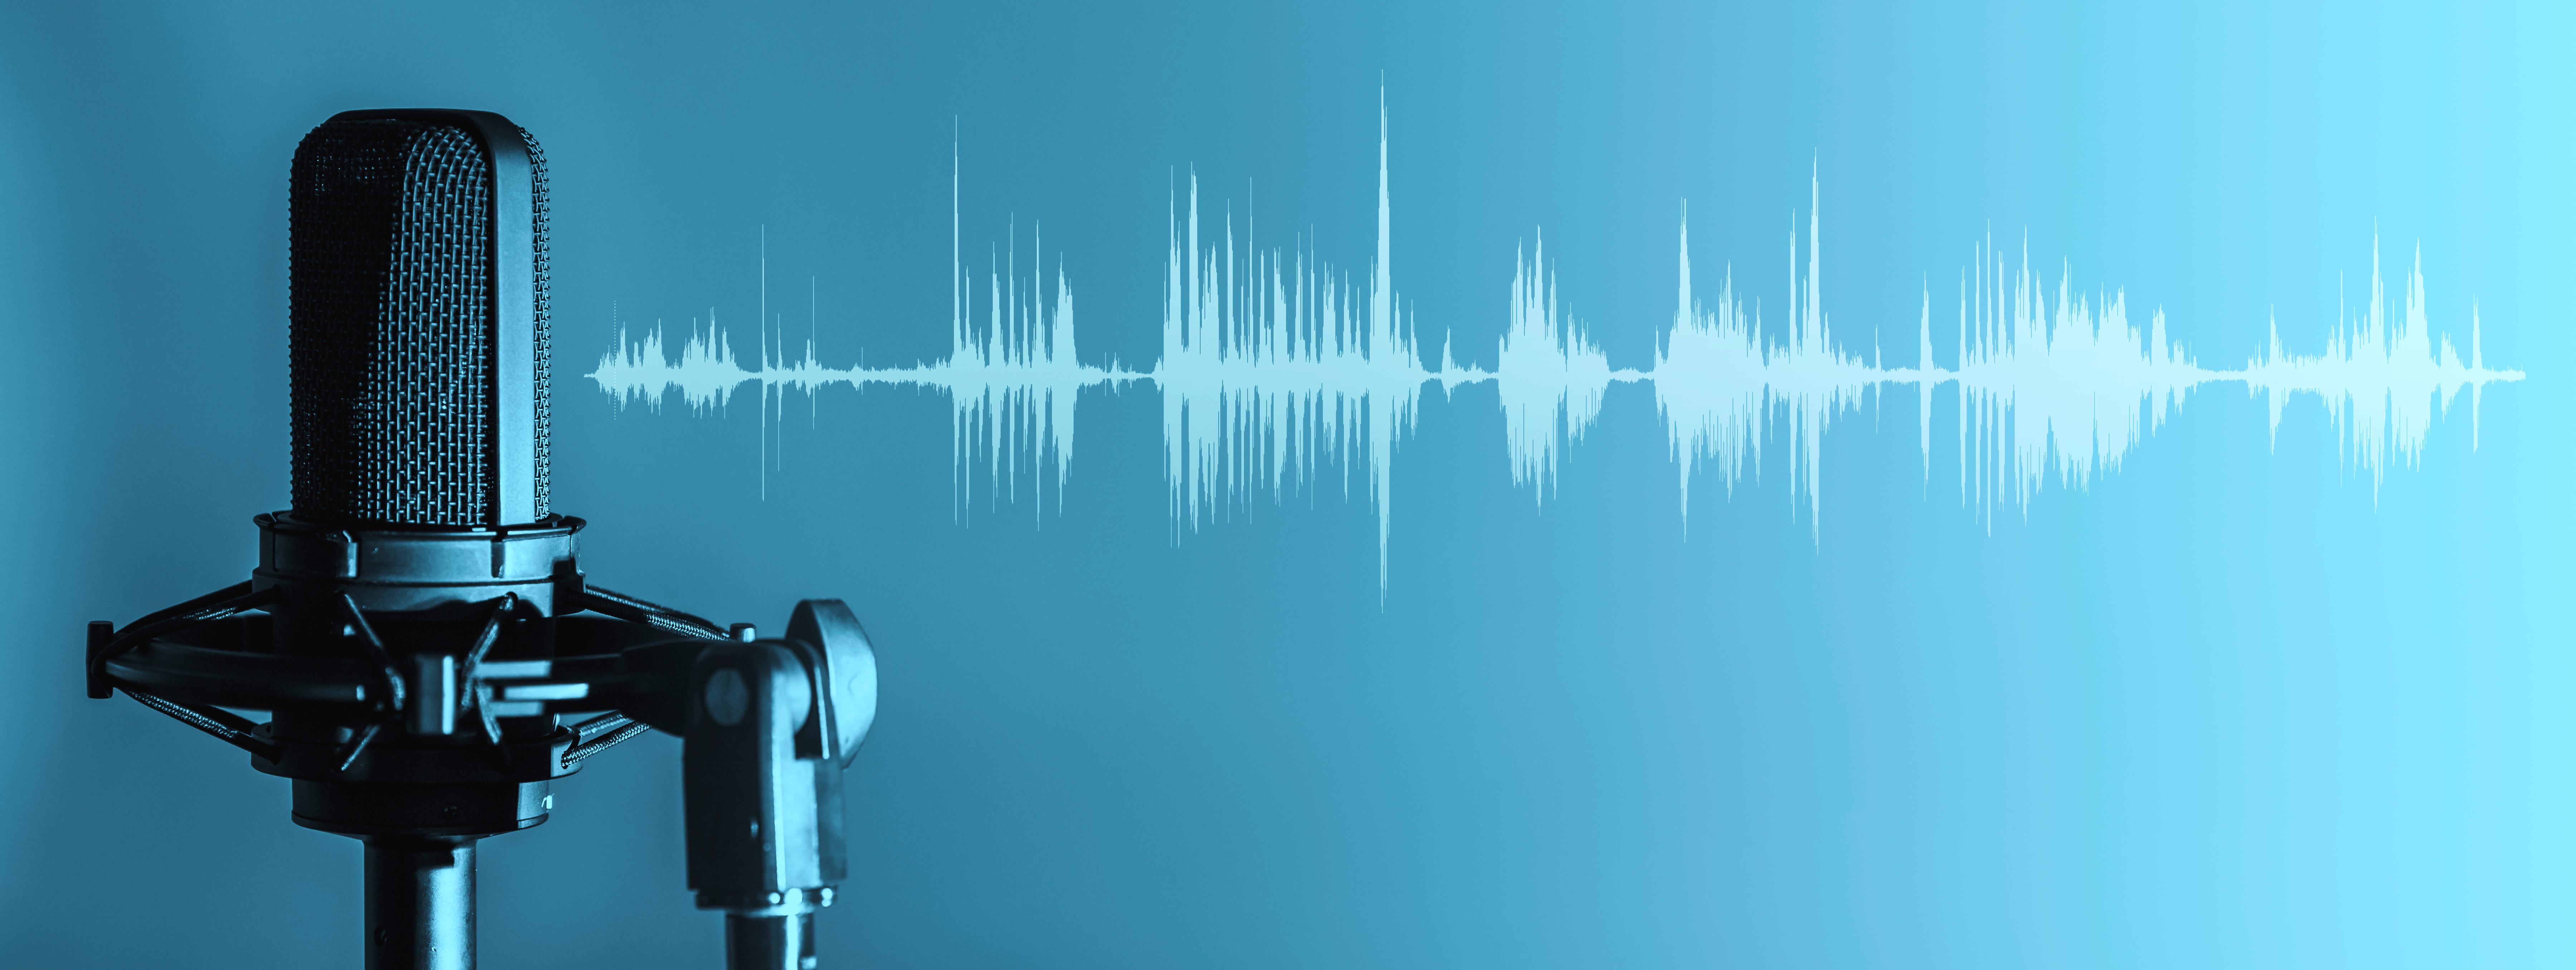 Photograph of a microphone on a blue-green background with a representation of soundwaves